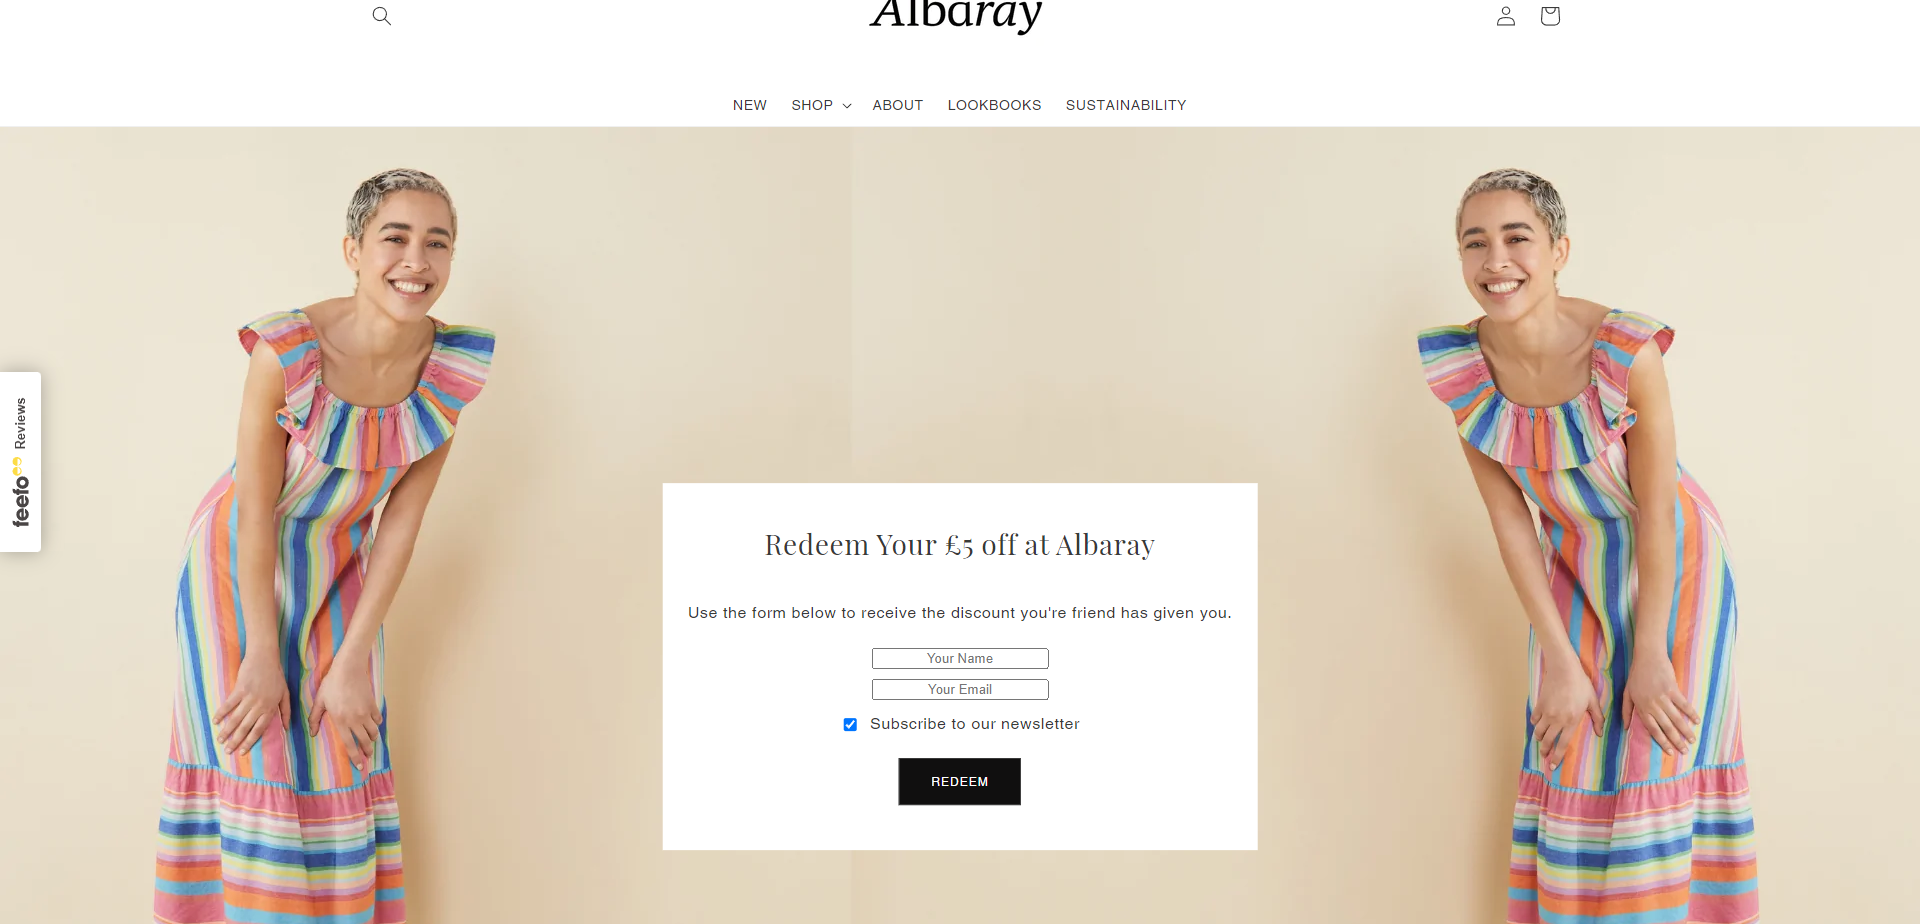 Referral Landing Page for Albaray